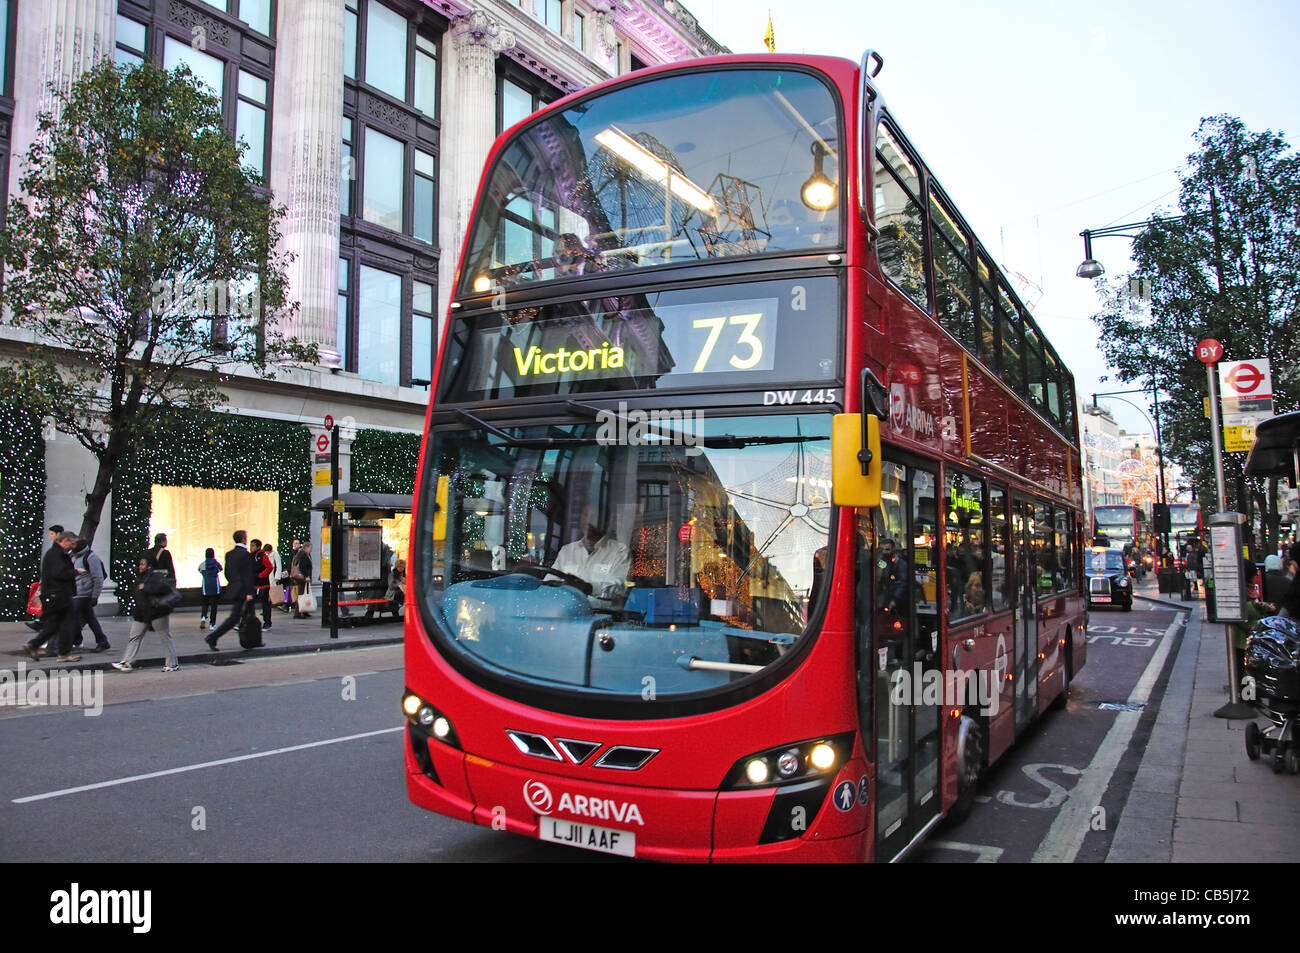 Double Decker bus in Oxford Street, City of Westminster, London, Greater London, England, Regno Unito Foto Stock